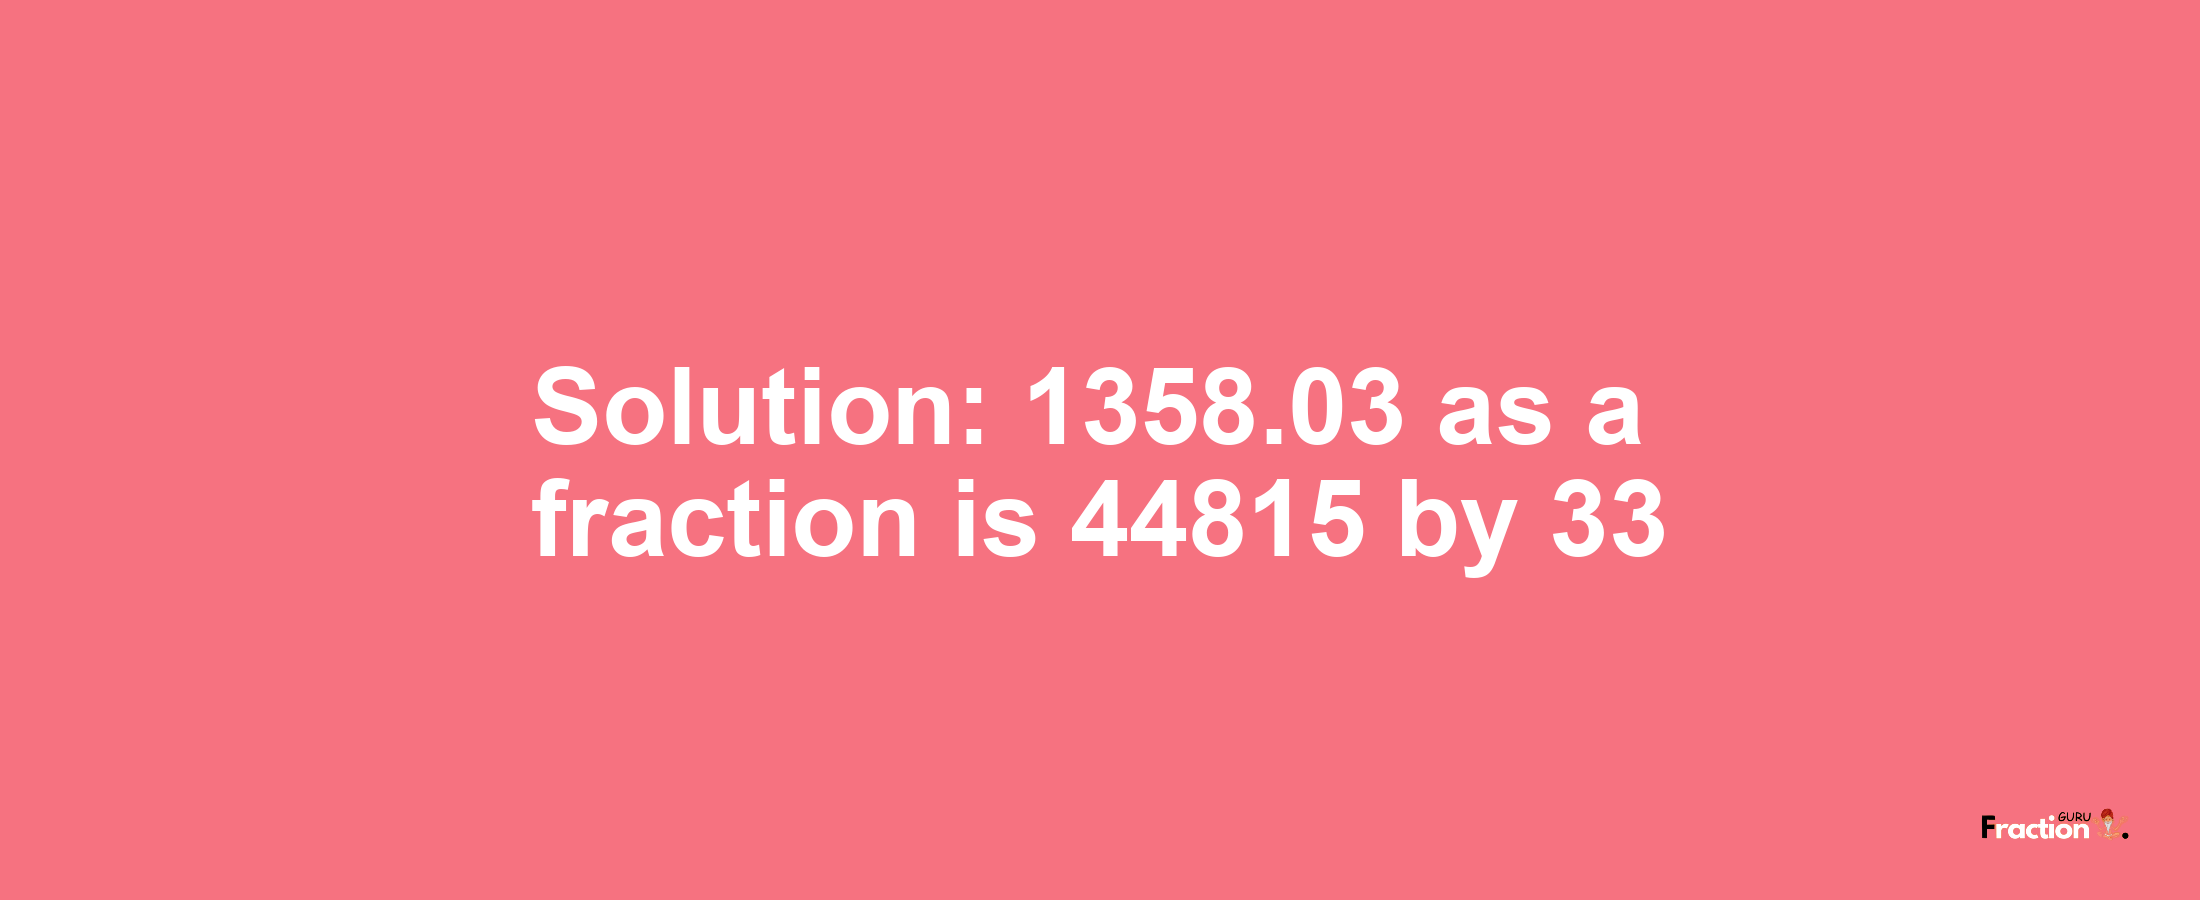 Solution:1358.03 as a fraction is 44815/33